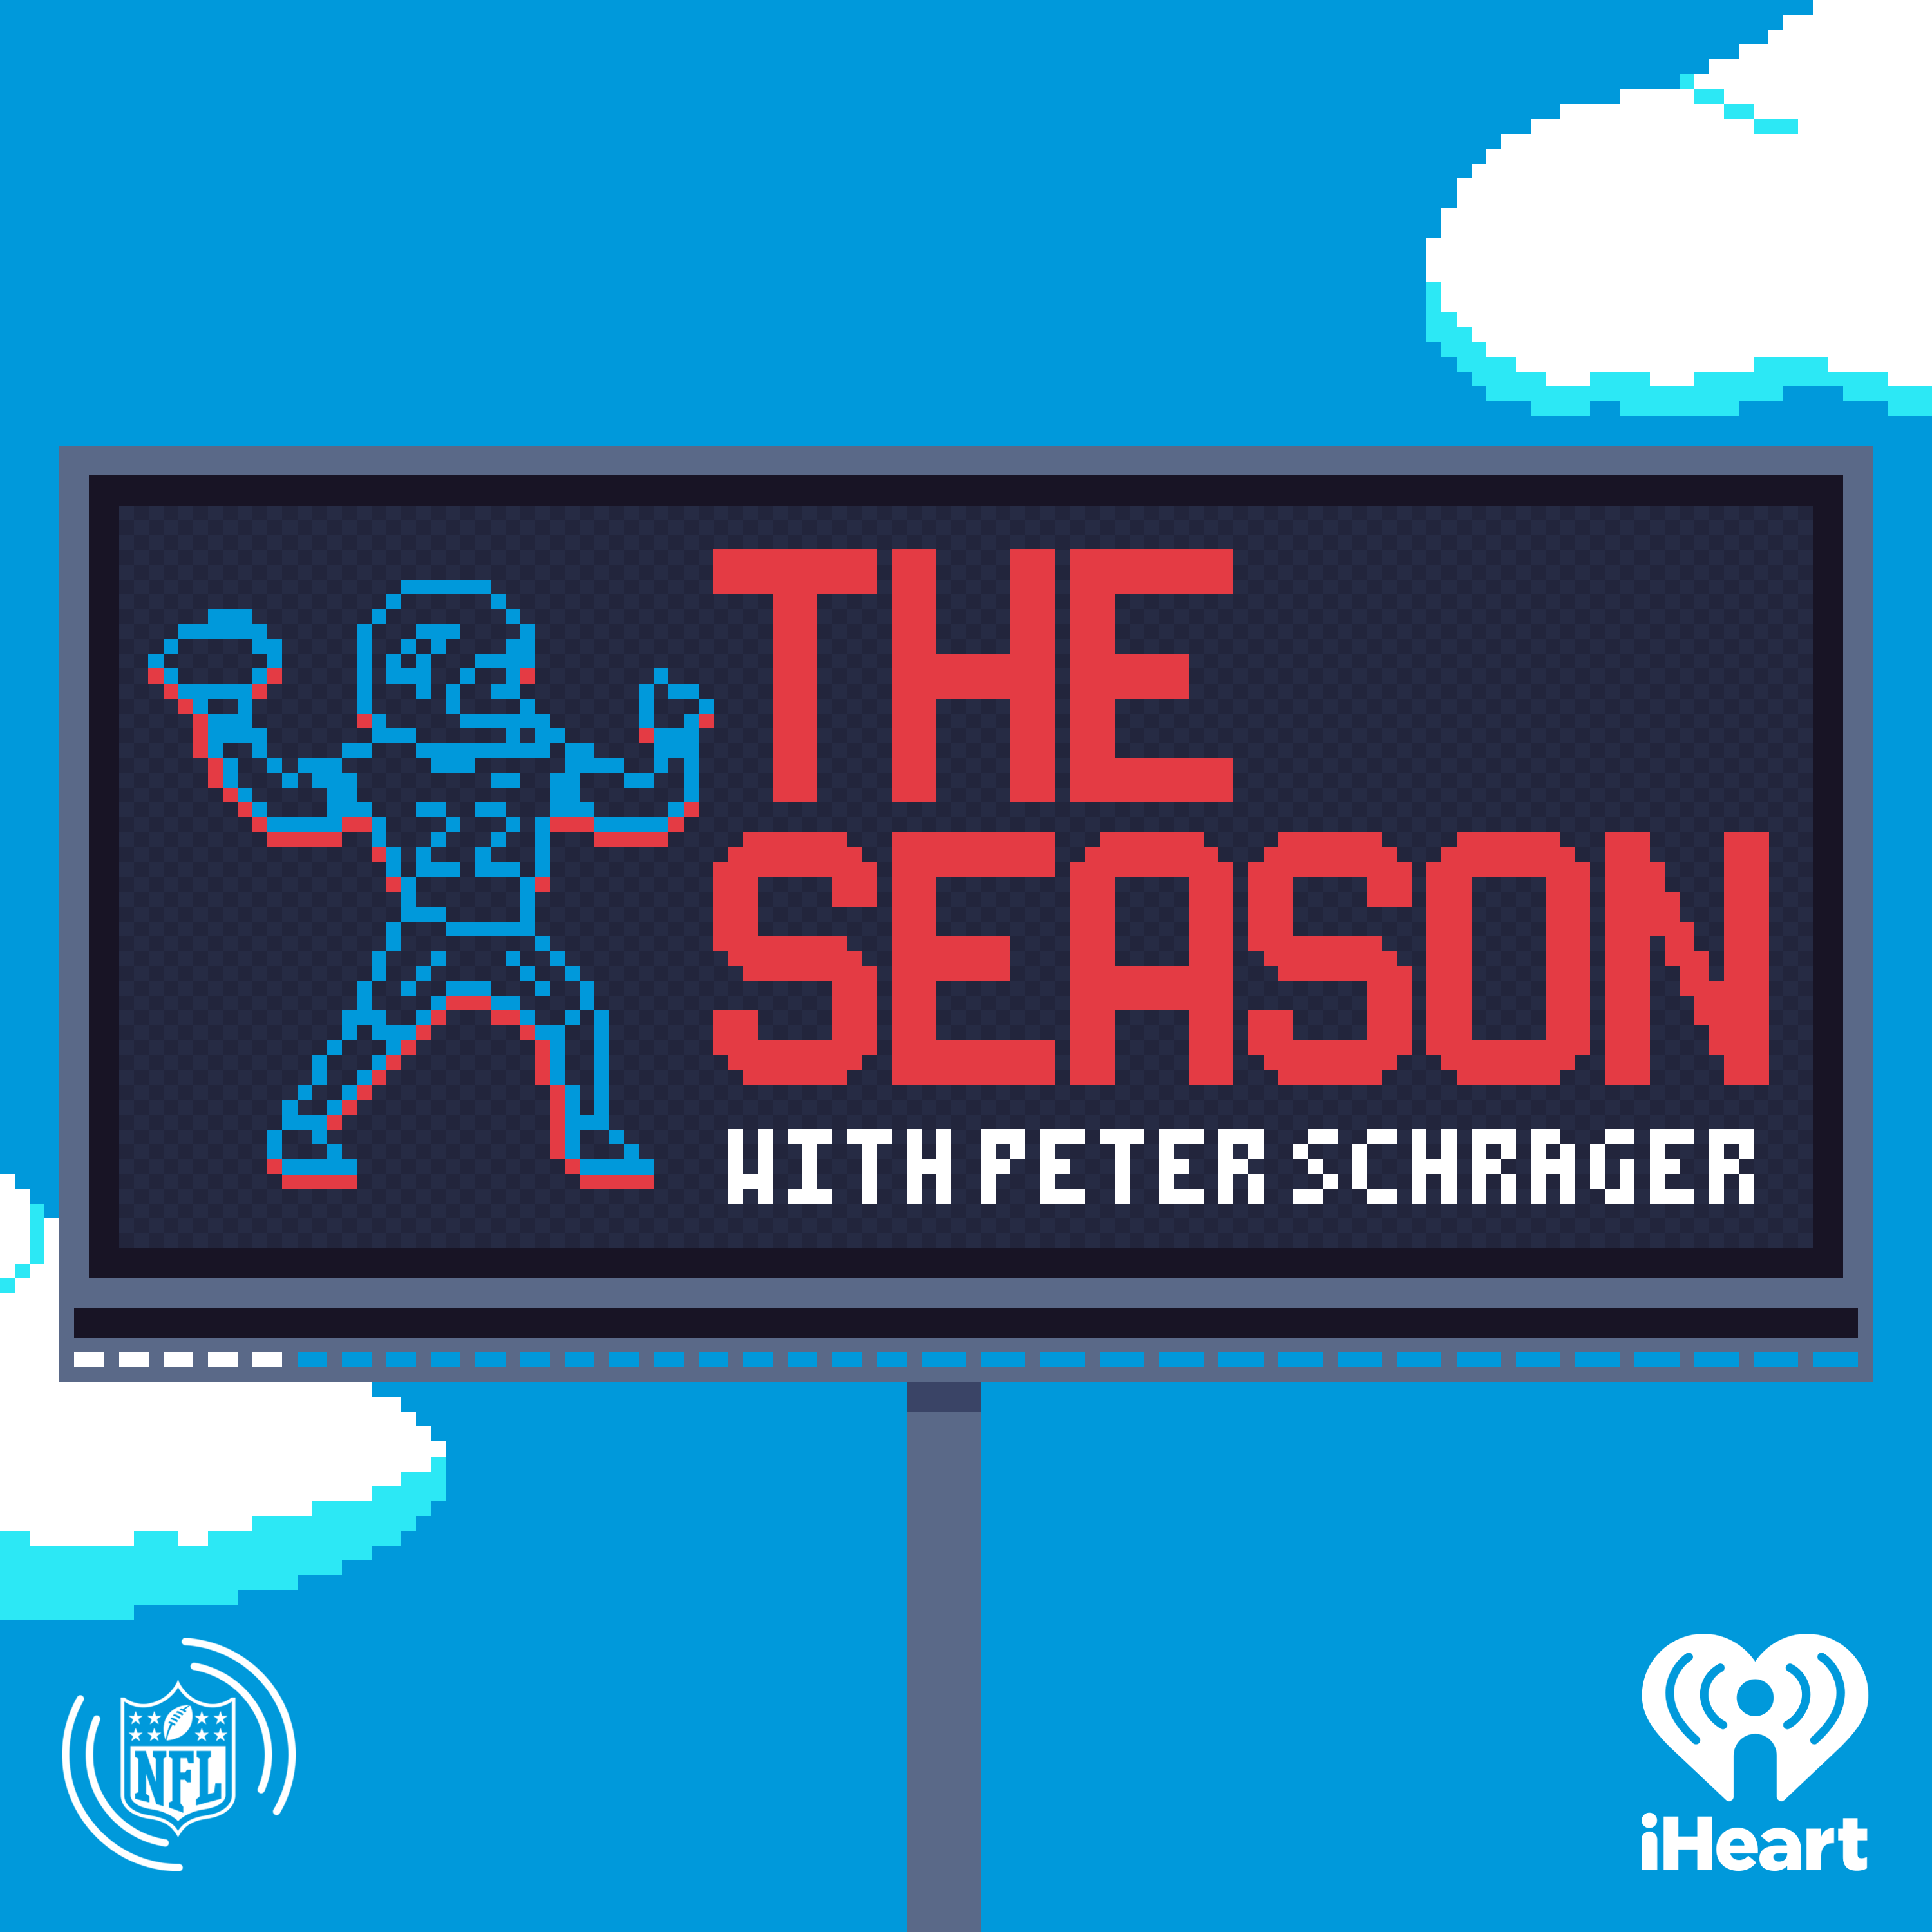 The Season with Peter Schrager: Lions GM Brad Holmes [Encore]